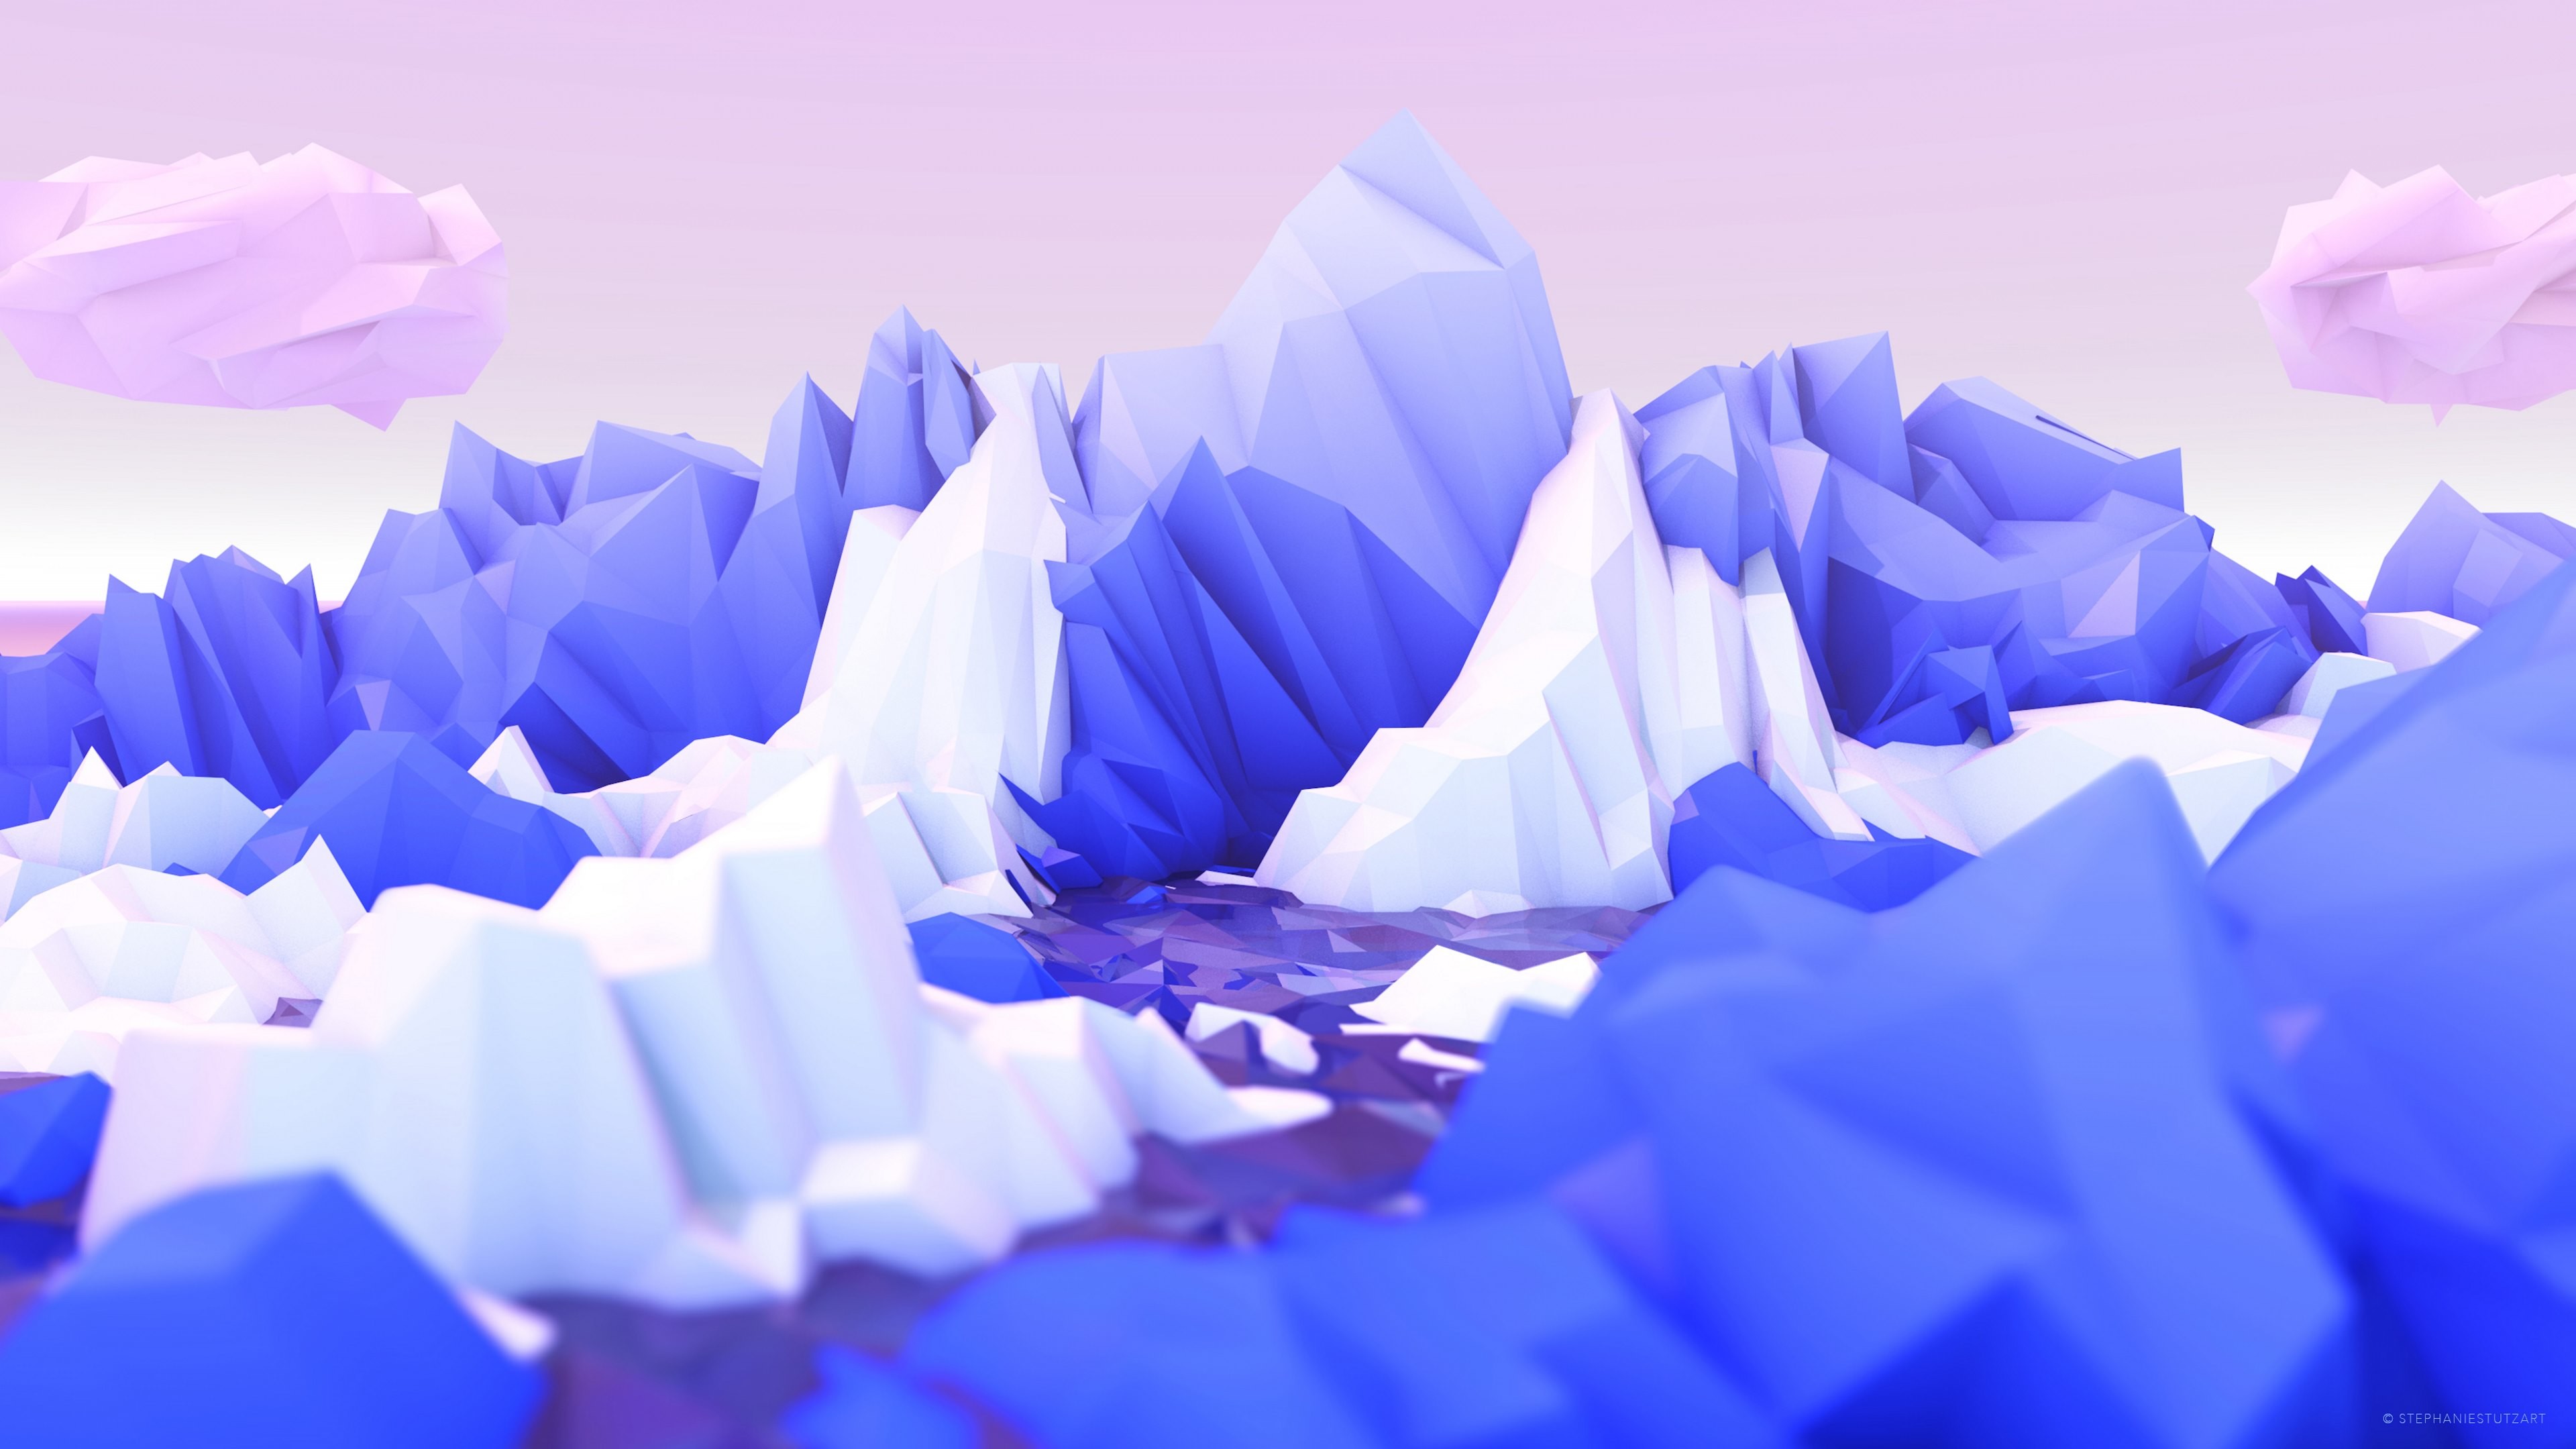 3840x2160 And here's the 2nd low poly art wallpaper from portfolio of the talented  digital artist - Stephanie Stutz Â· With her permission, the wallpaper is  optimized ...